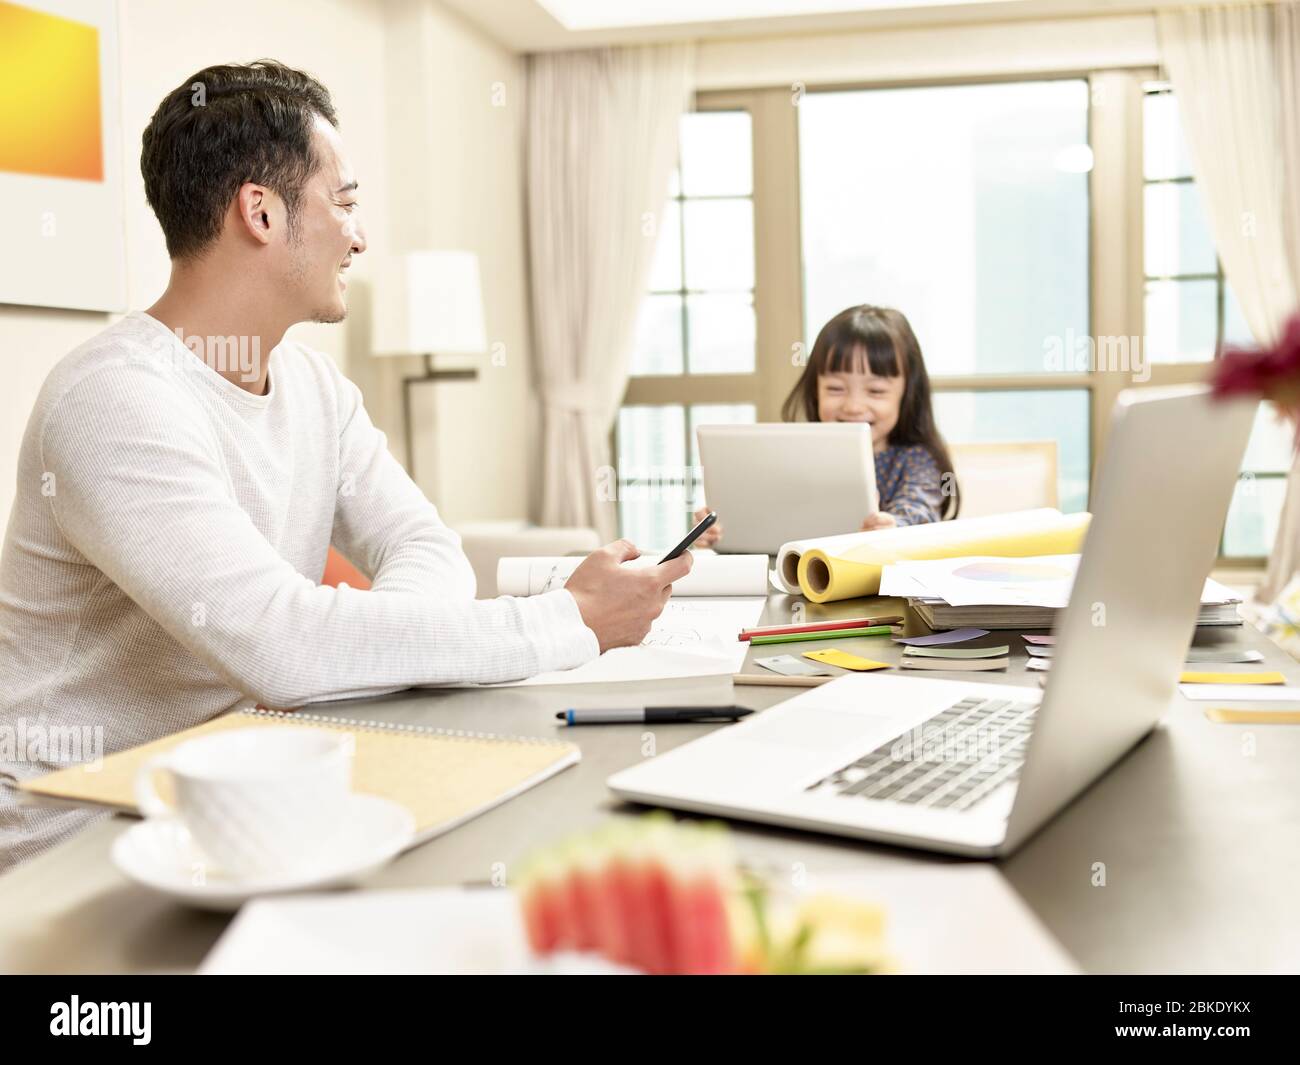 young asian business man taking care of child while working from home (artwork in background digitally altered) Stock Photo